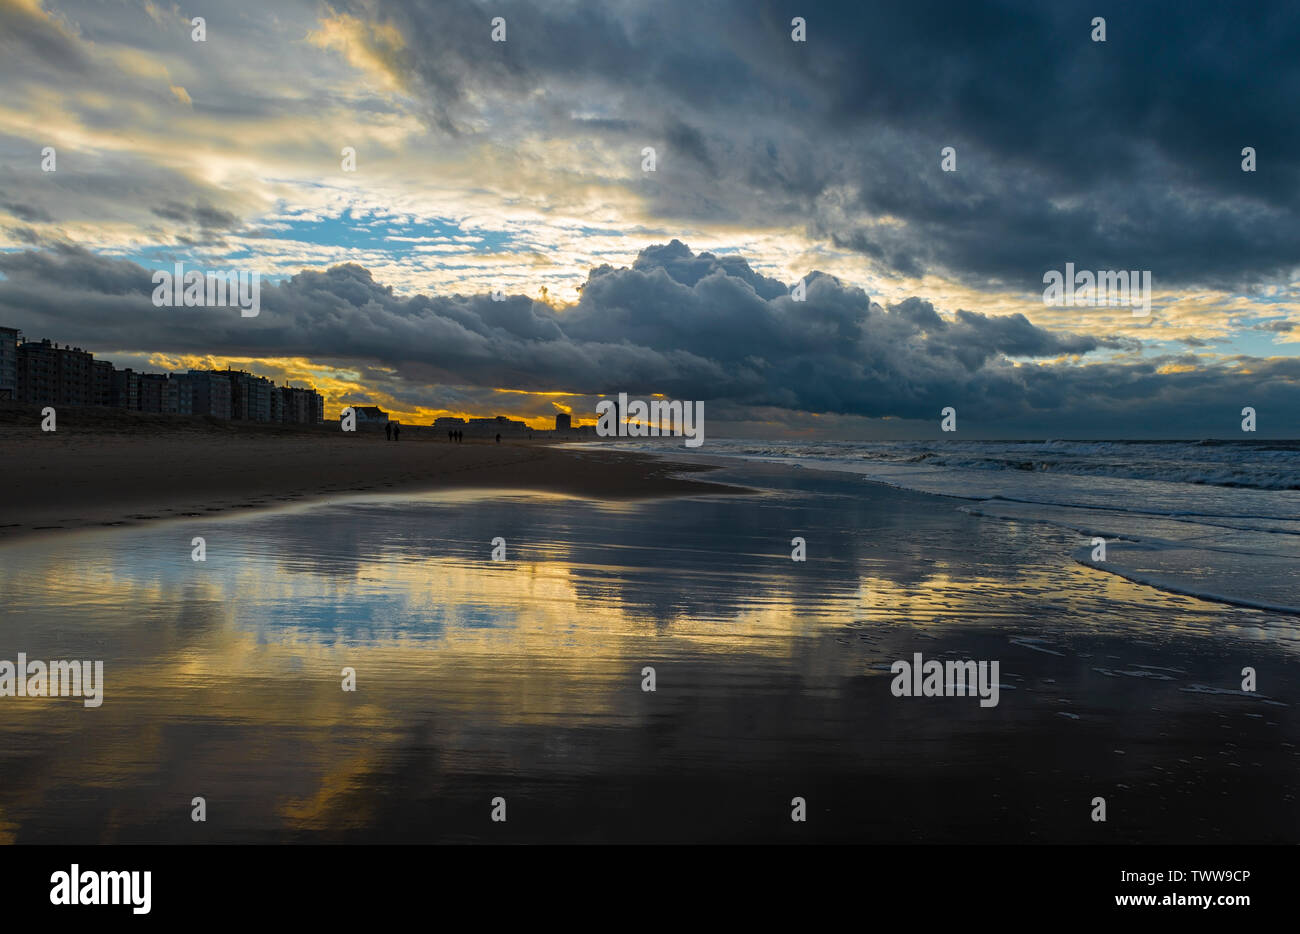 Sunset along the beach of Oostende (Ostend in English) during a thunder storm by the North Sea, West Flanders, Belgium. Stock Photo